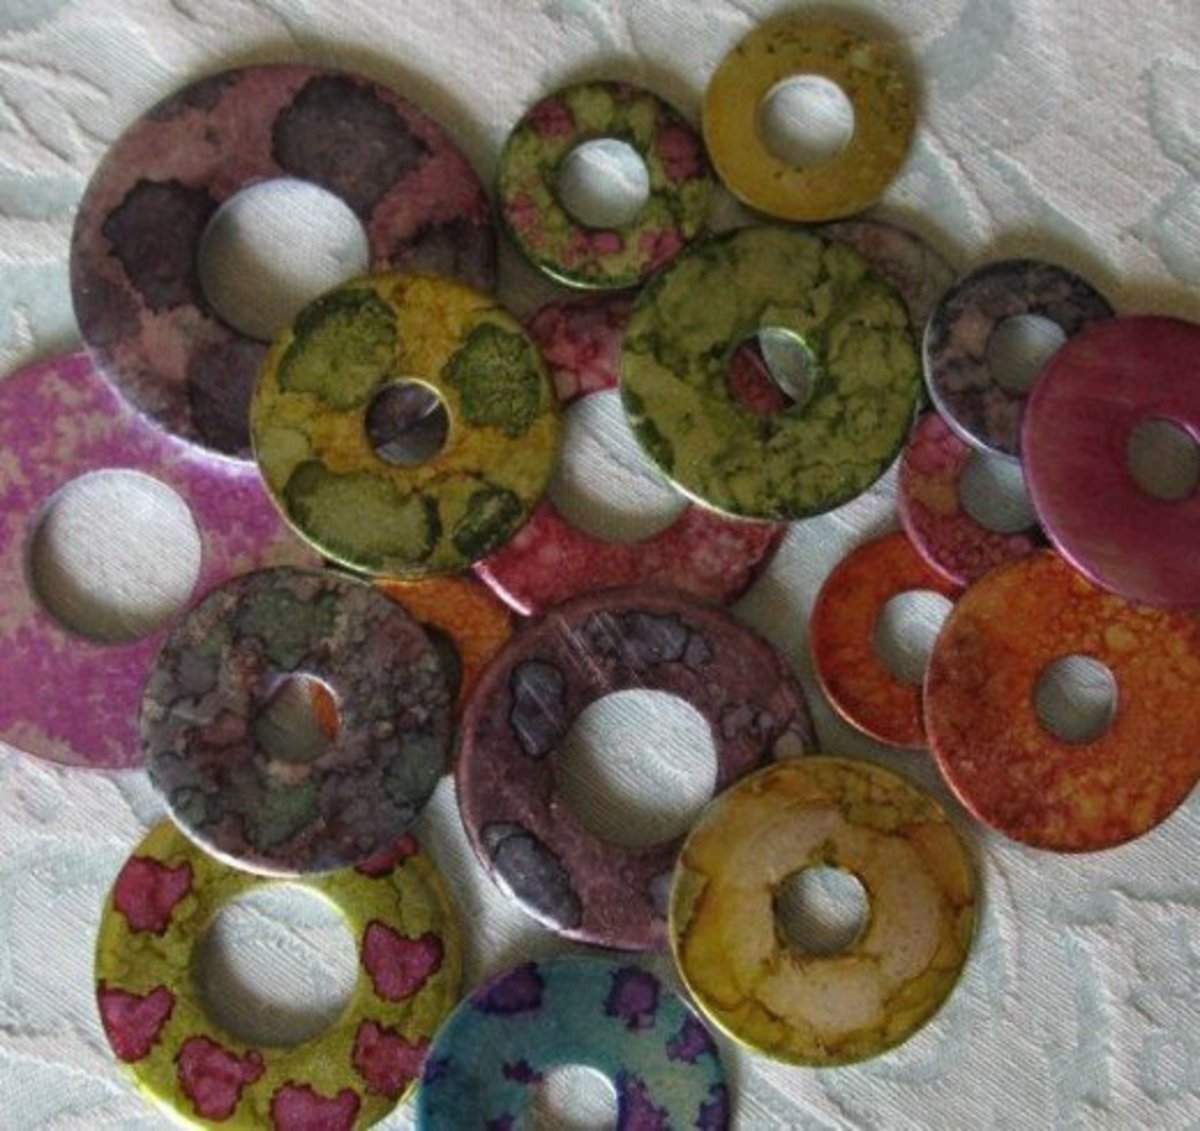 More Finished Metal Washers - Ready for Alcohol Ink Projects!